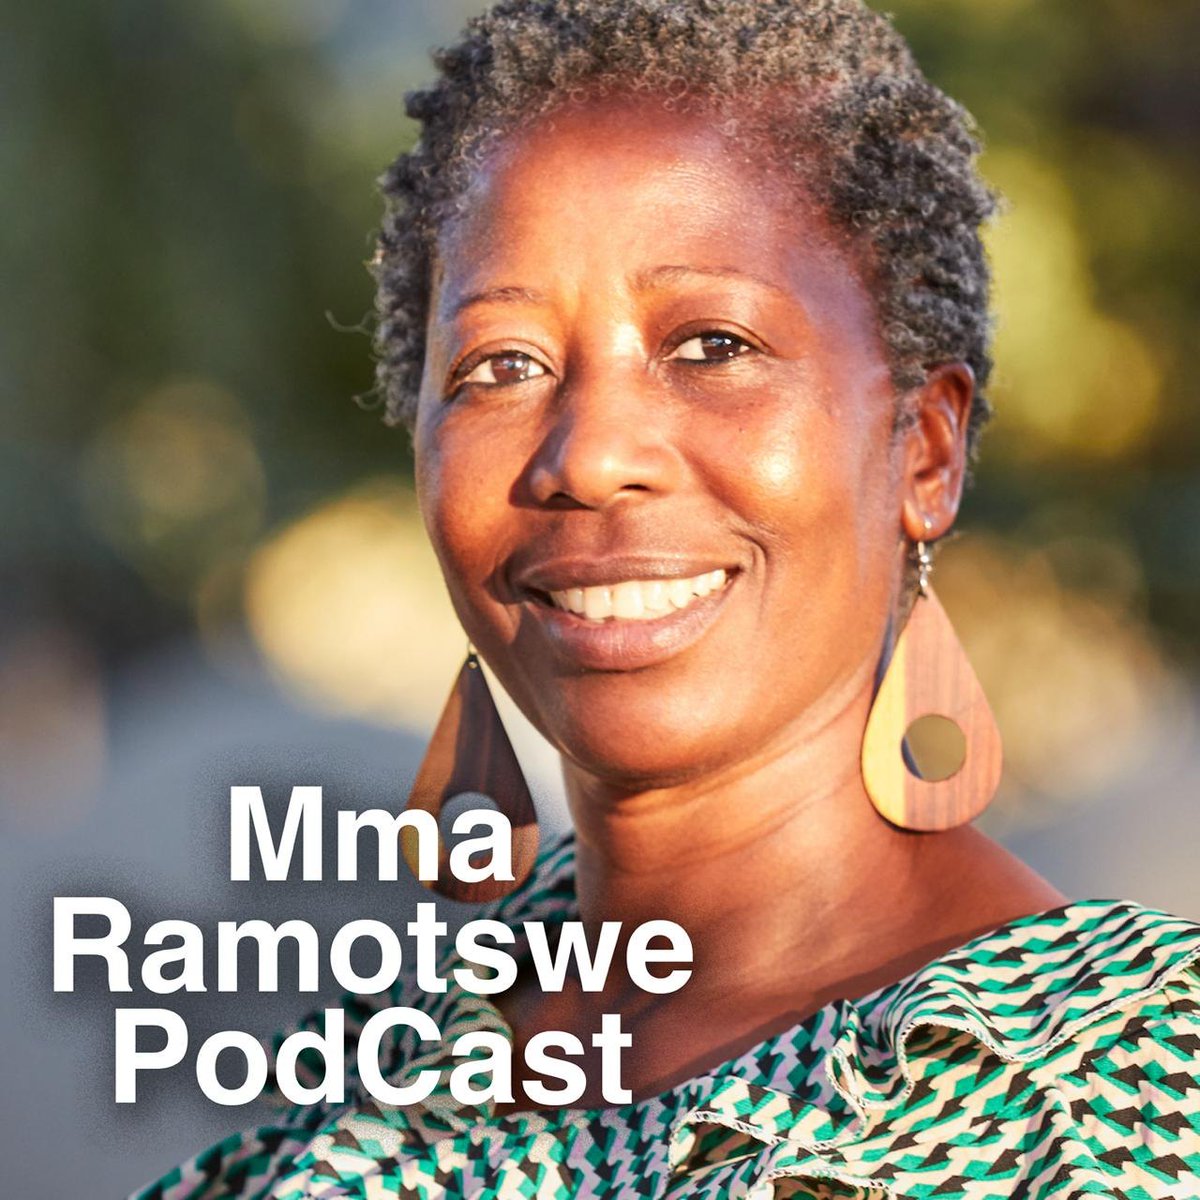 The latest episode in the Mma Ramotswe Podcast is now available! We all know that Botswana is the home country of the No.1 Lady Detective- but how many of us know about the wonderful food of Botswana? Stream now: open.spotify.com/episode/79ElLZ…